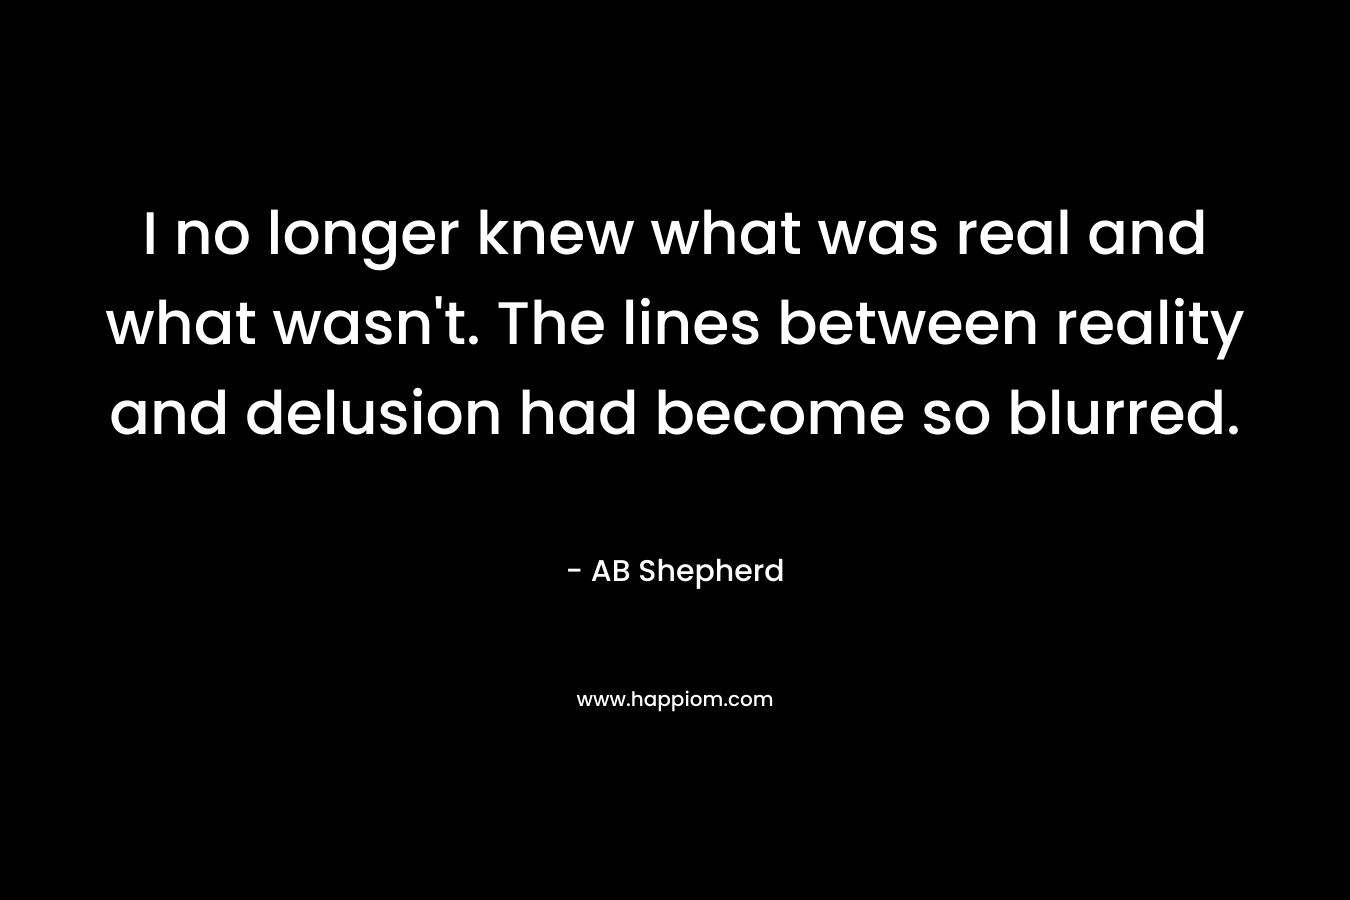 I no longer knew what was real and what wasn't. The lines between reality and delusion had become so blurred.